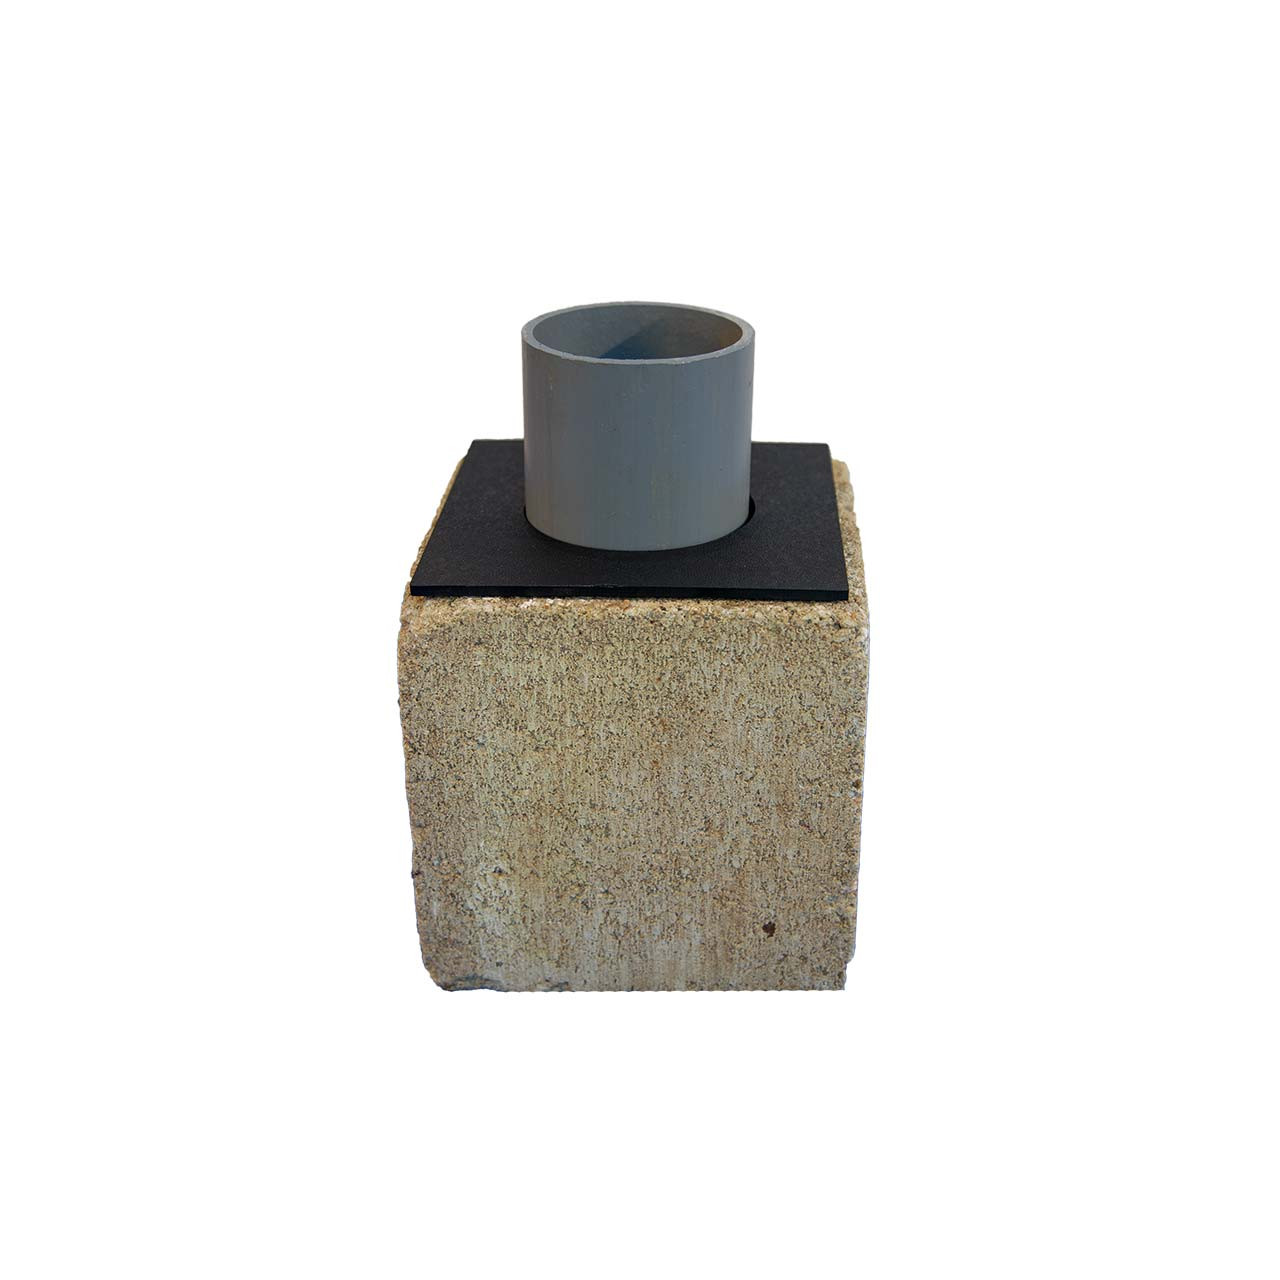 Concrete Block Adapter ready to go